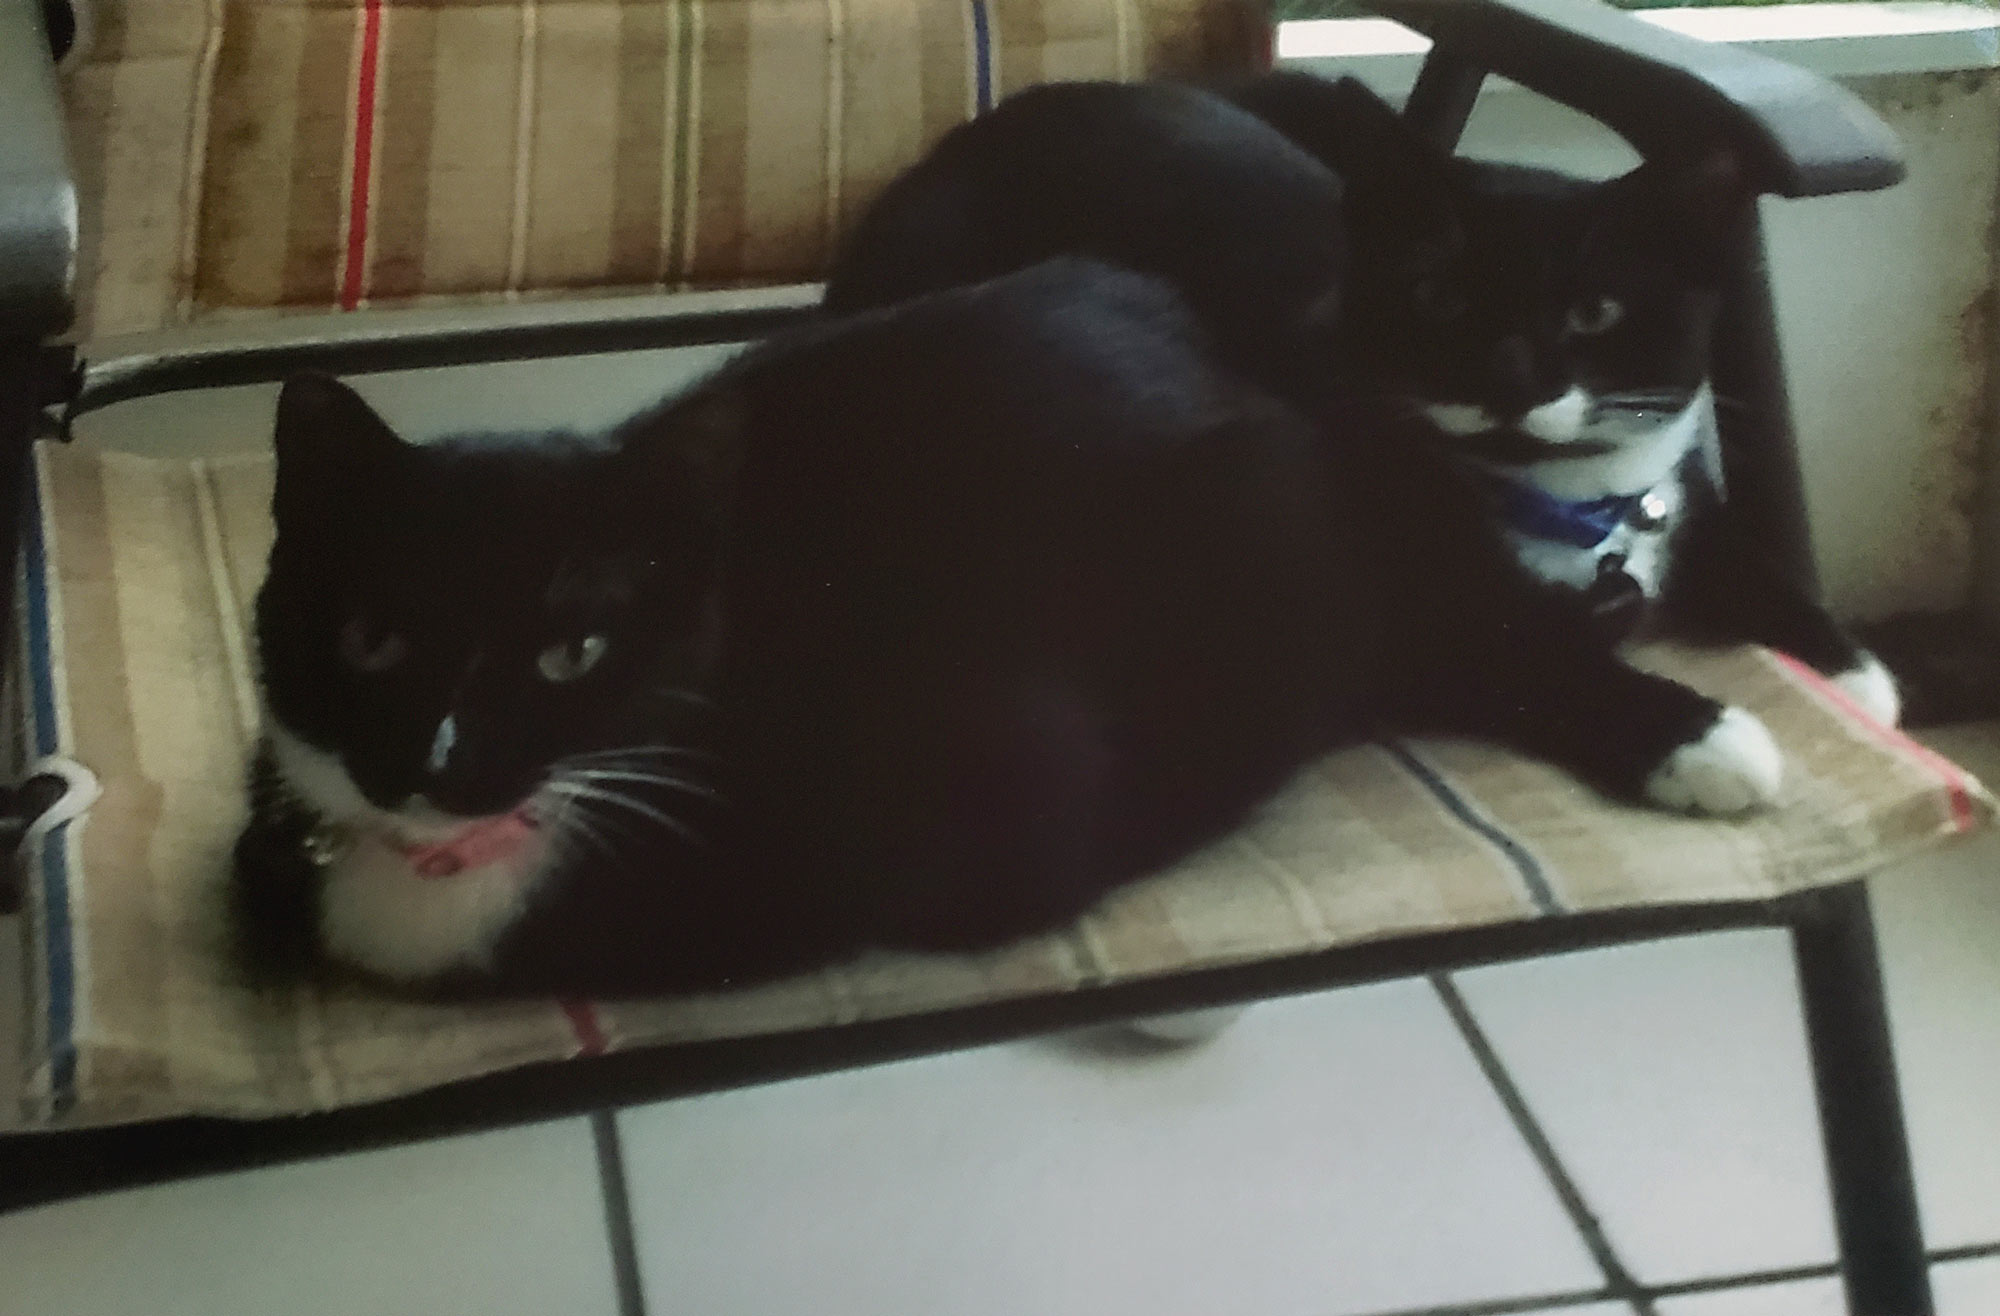 Kathleen B. in North Port, FL. sent a picture of her two bonded black cats, both with white feet, snuggling on the chair.